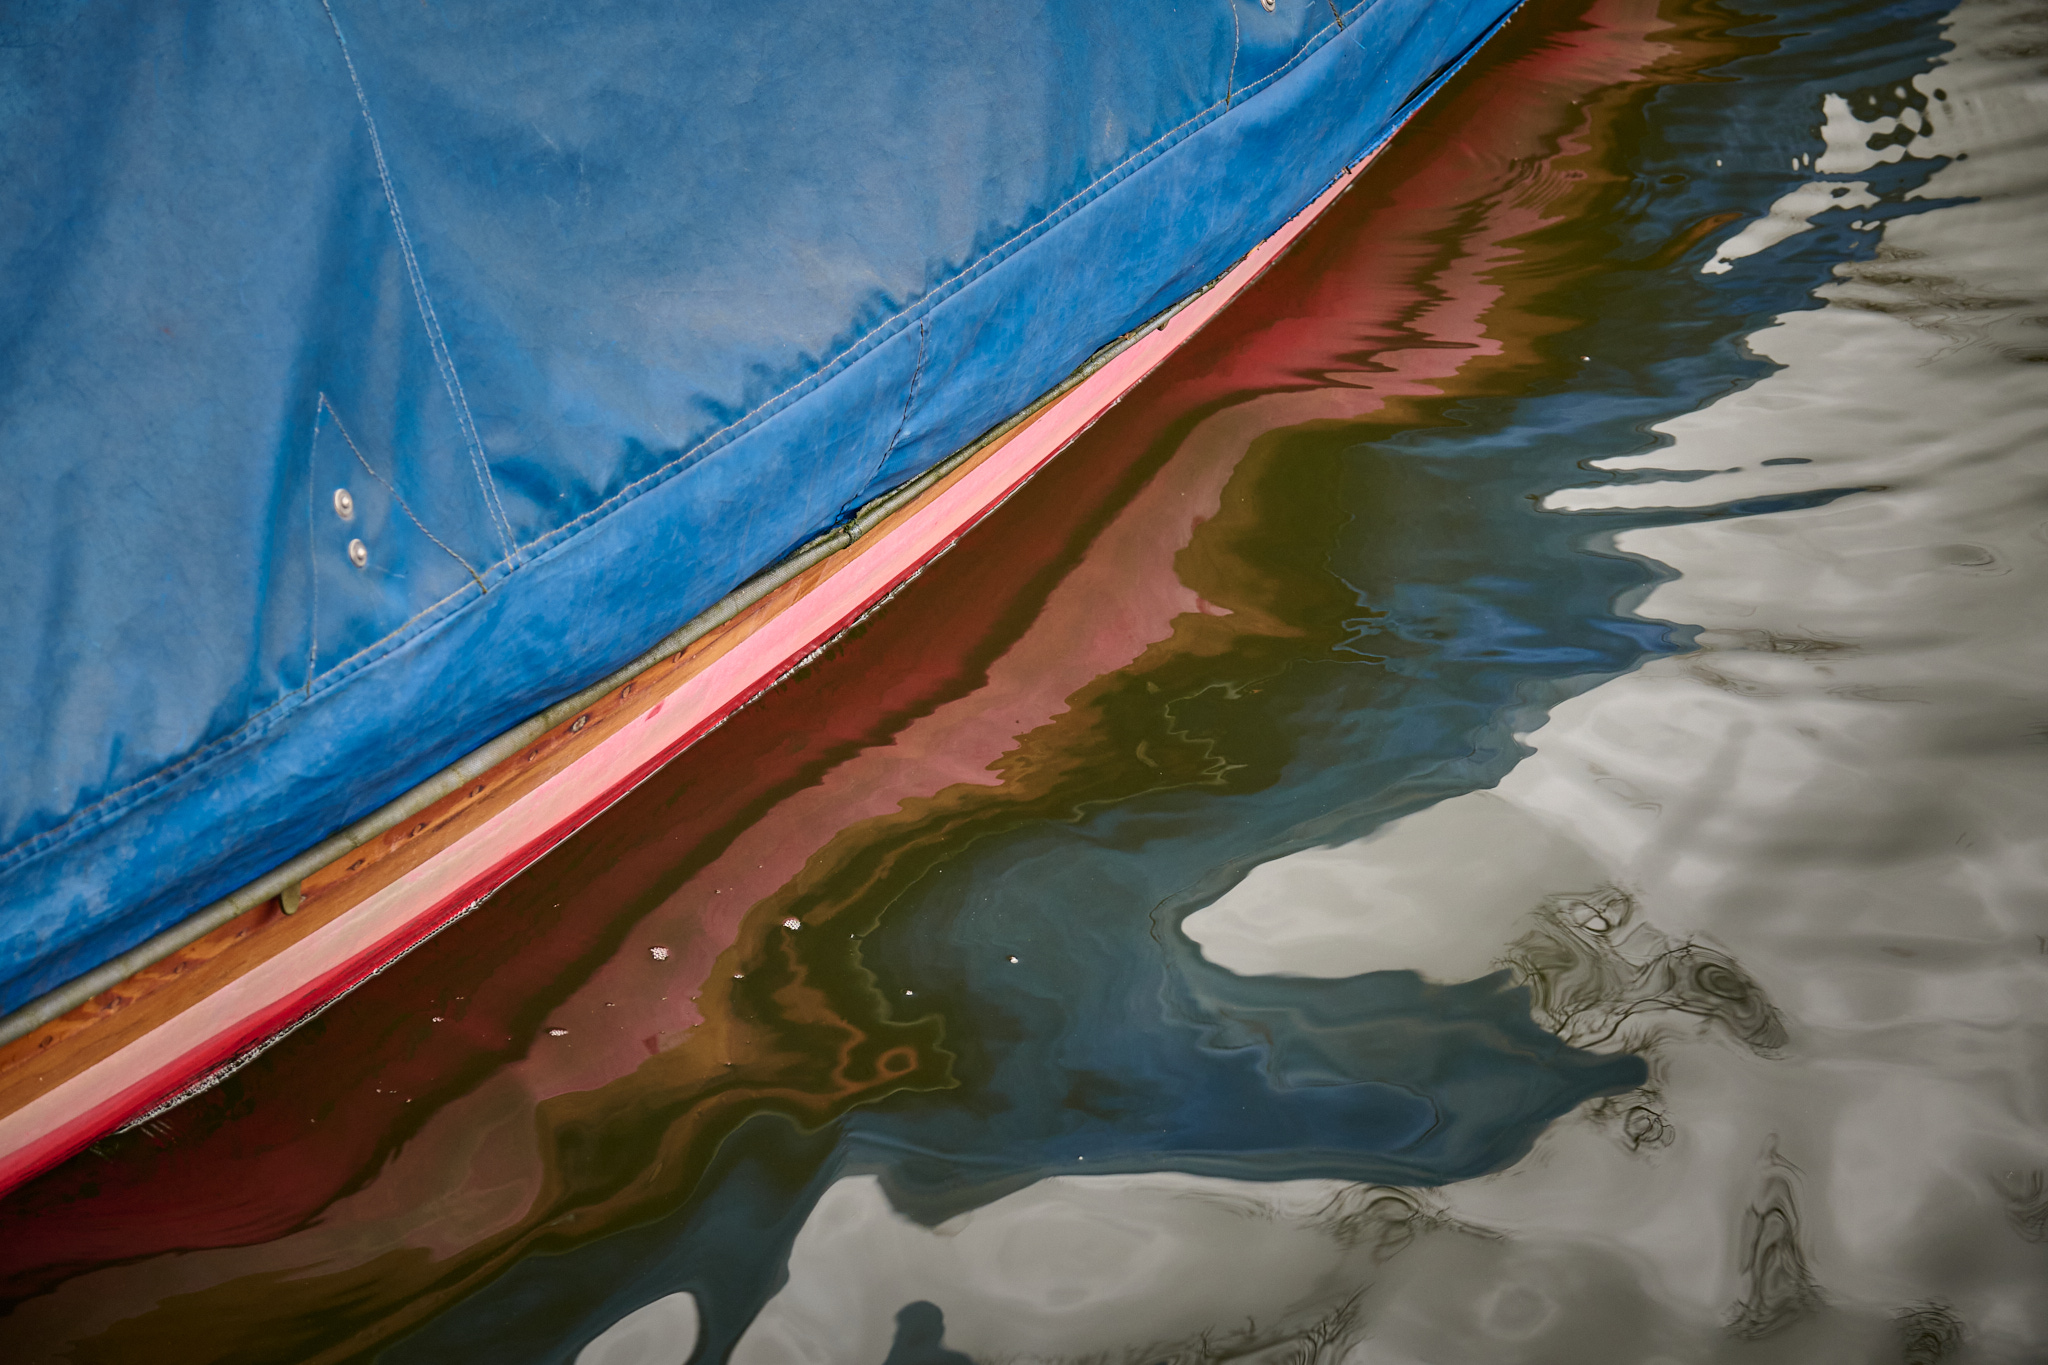 Detail of a boat...